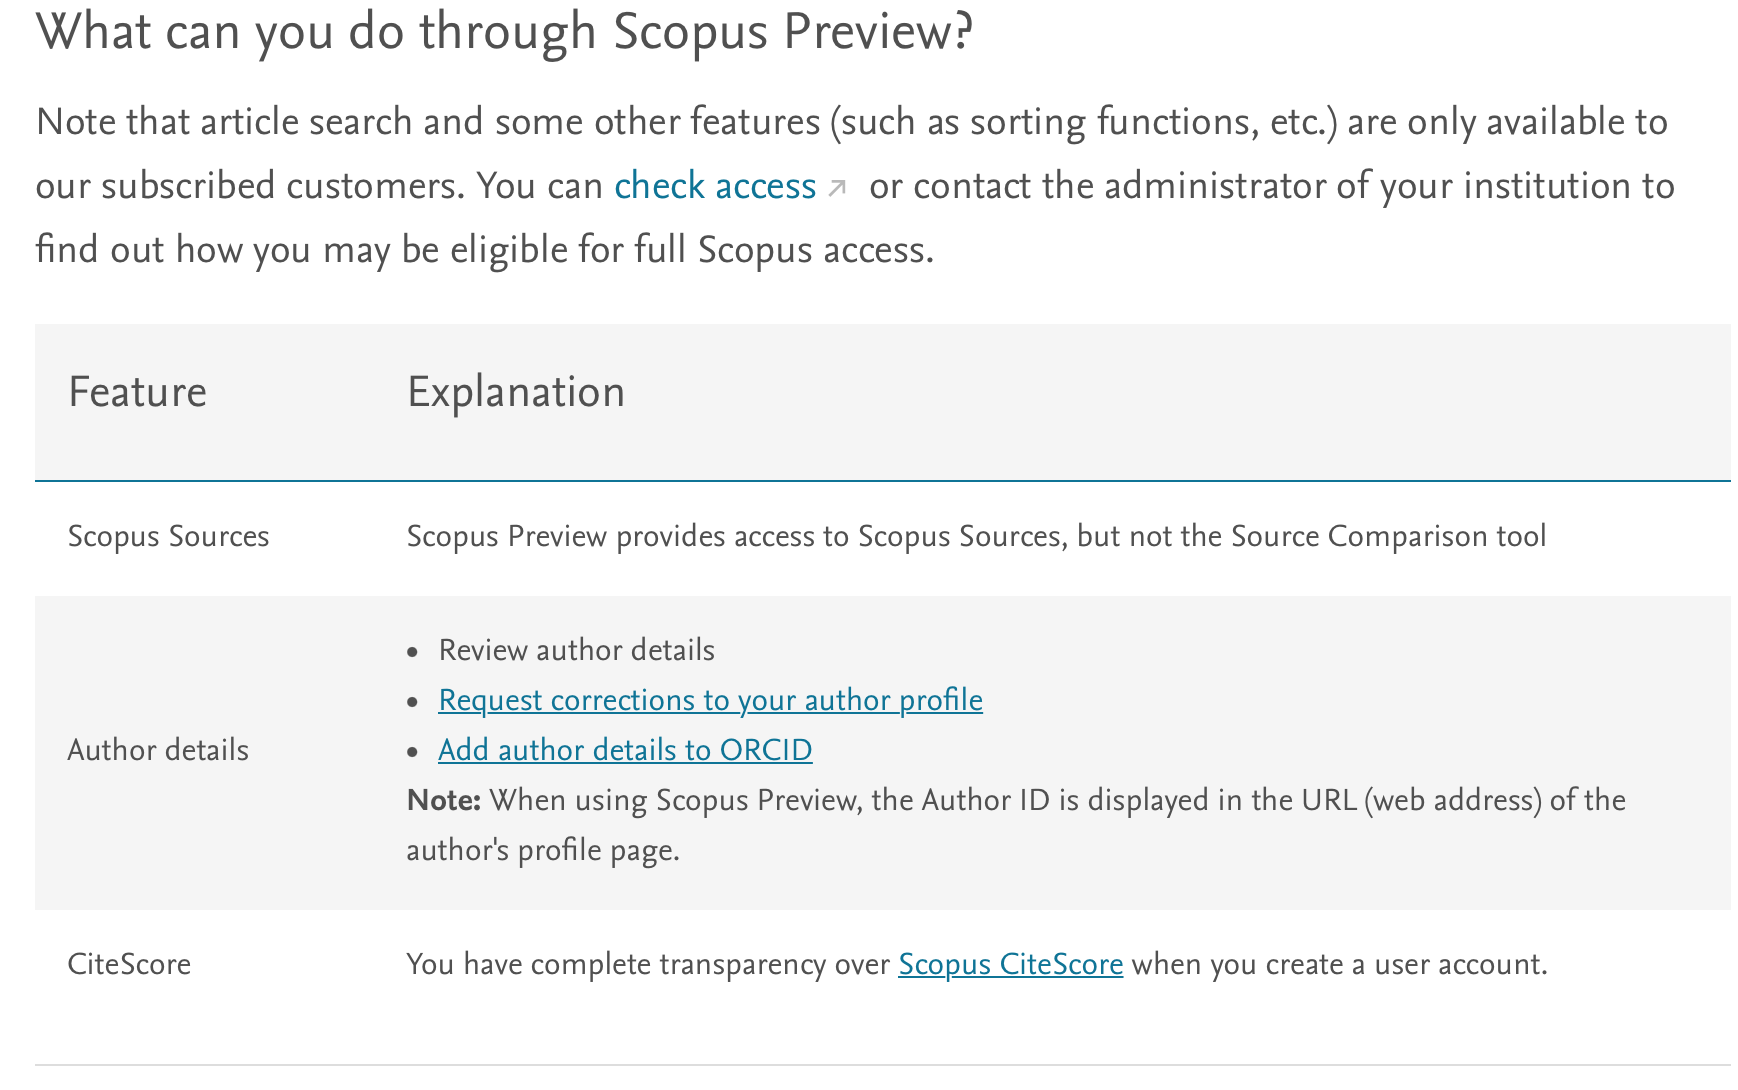 Scopus Preview